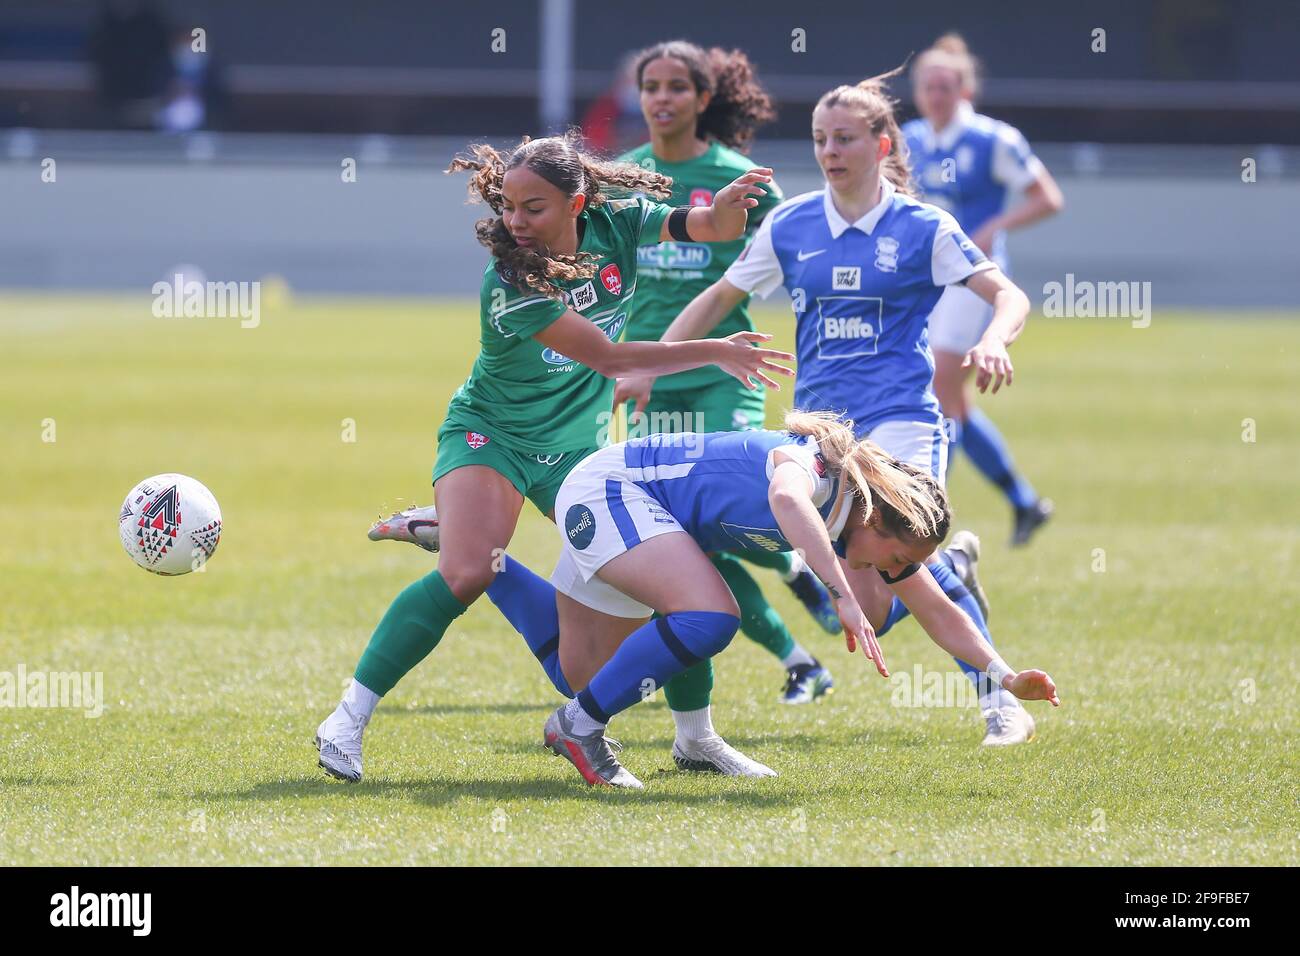 Solihull, West Midlands, UK. 18th Apr, 2021. Birmingham Citywomen 5 - 1 Coventry United in fourth round of the FA Vitality Cup. Credit: Peter Lopeman/Alamy Live News Stock Photo